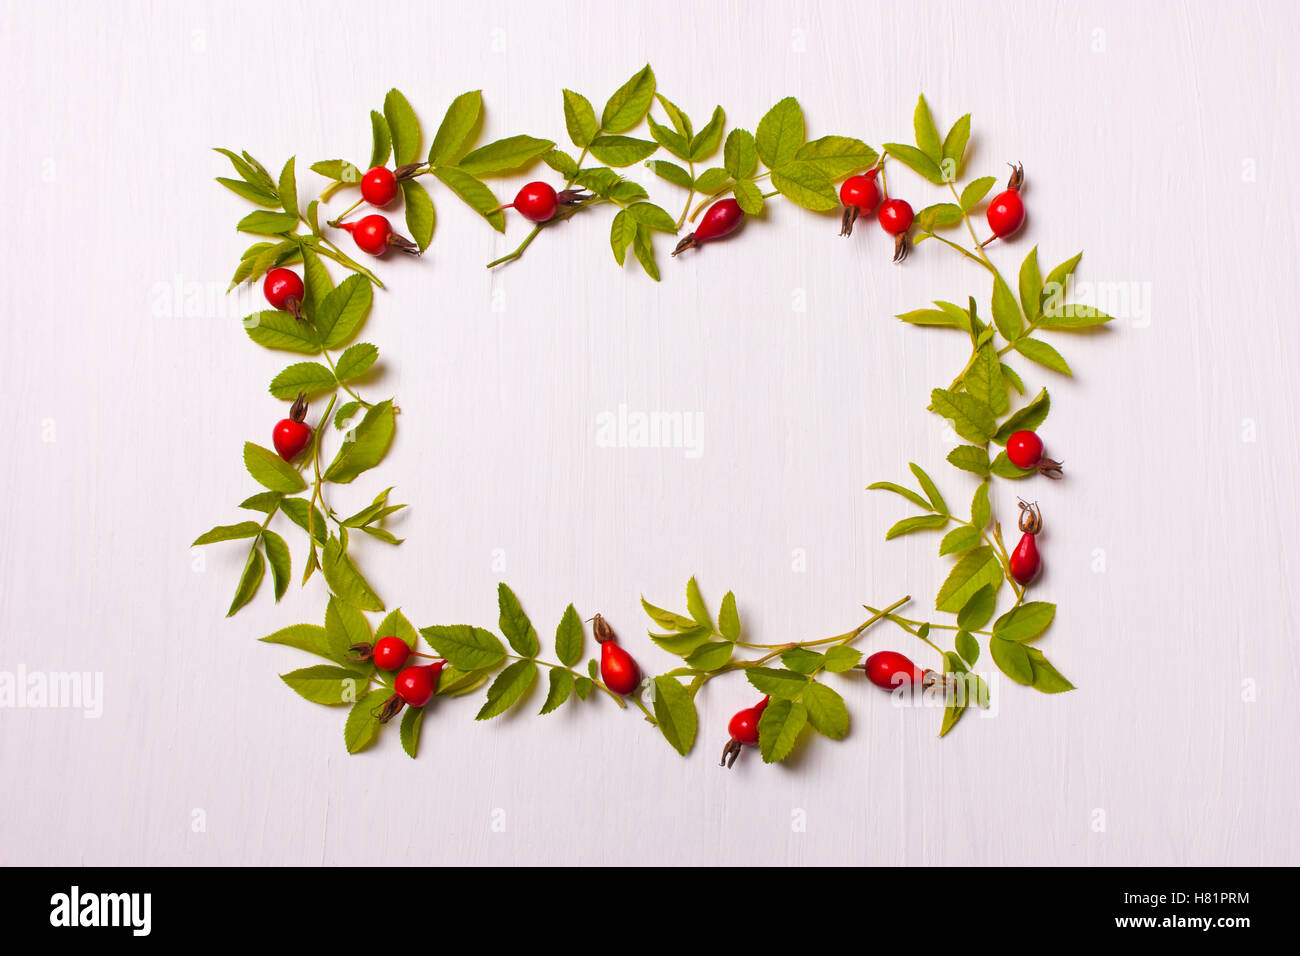 The square frame with leaves and red flowers, berries.Flat lay, top view. Stock Photo